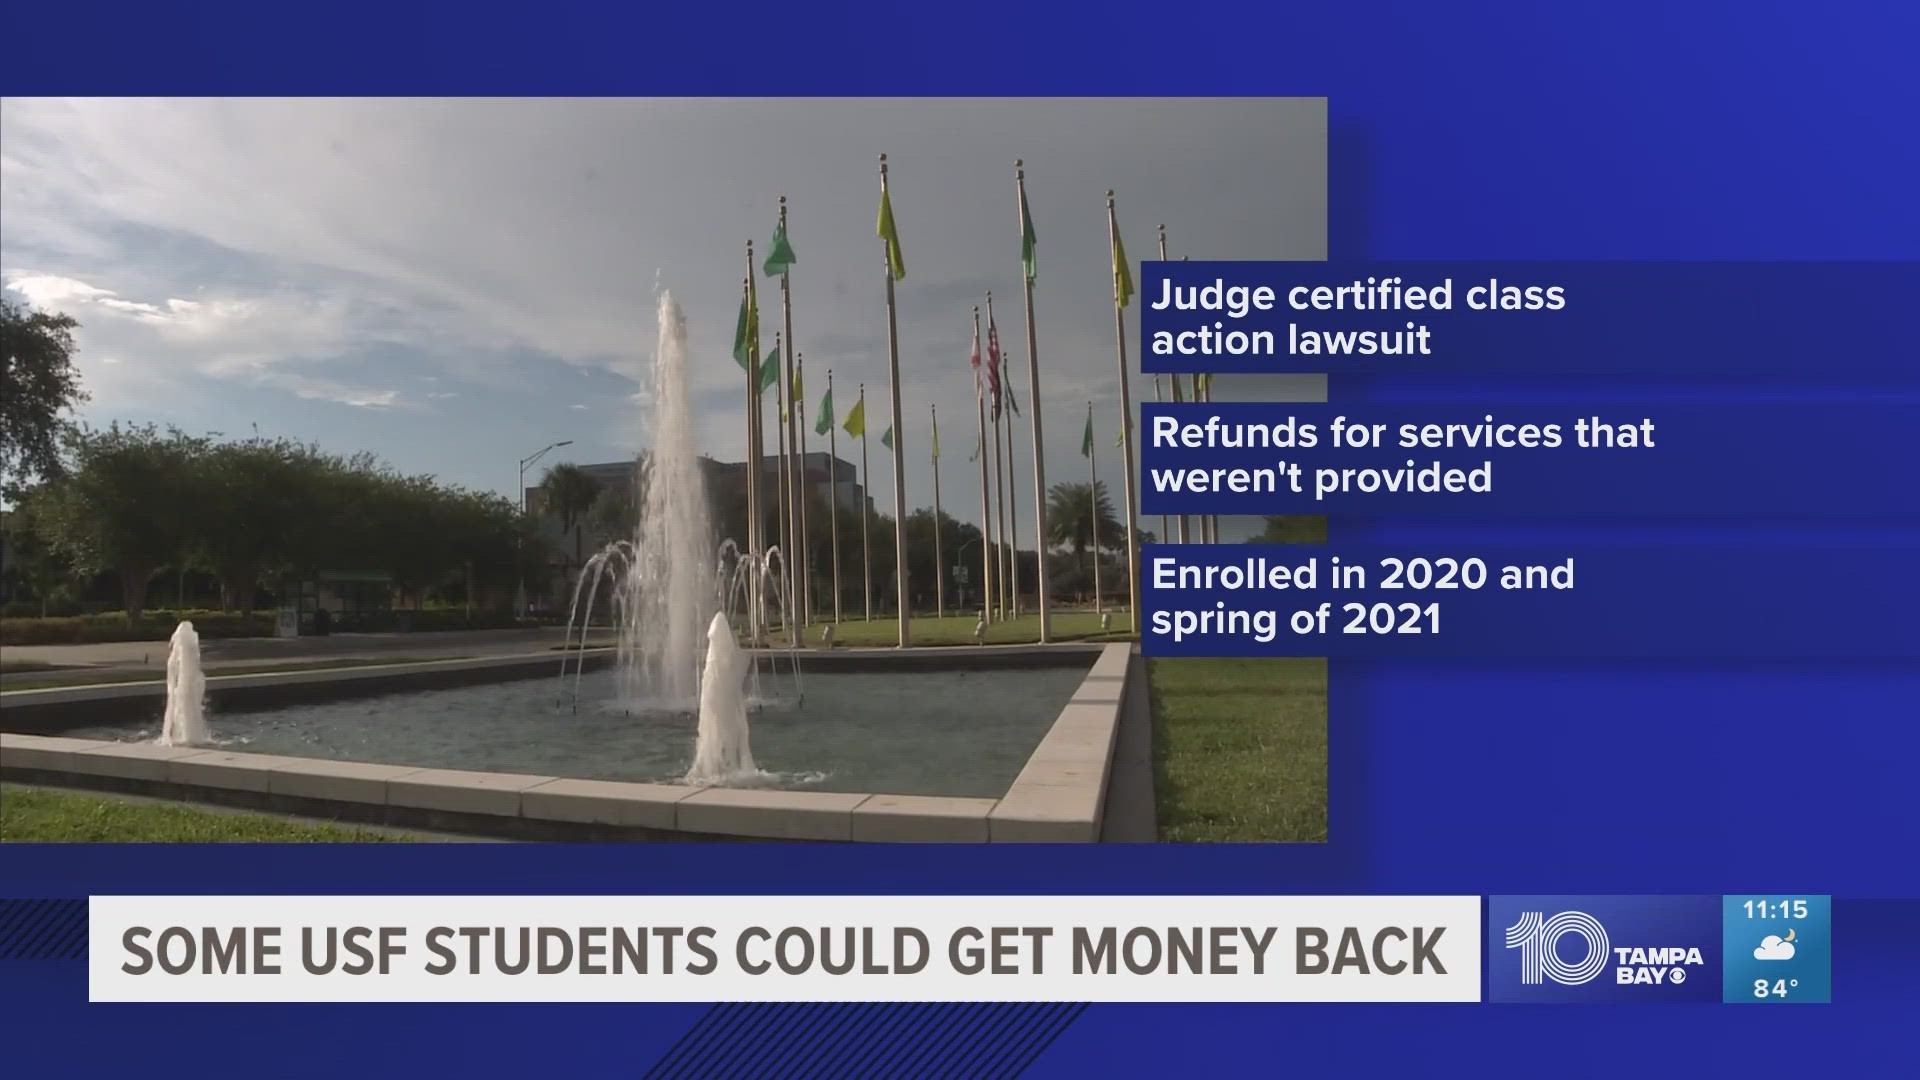 The lawsuit is one of numerous cases in Florida and across the country seeking refunds of money that students paid for services that were not provided.